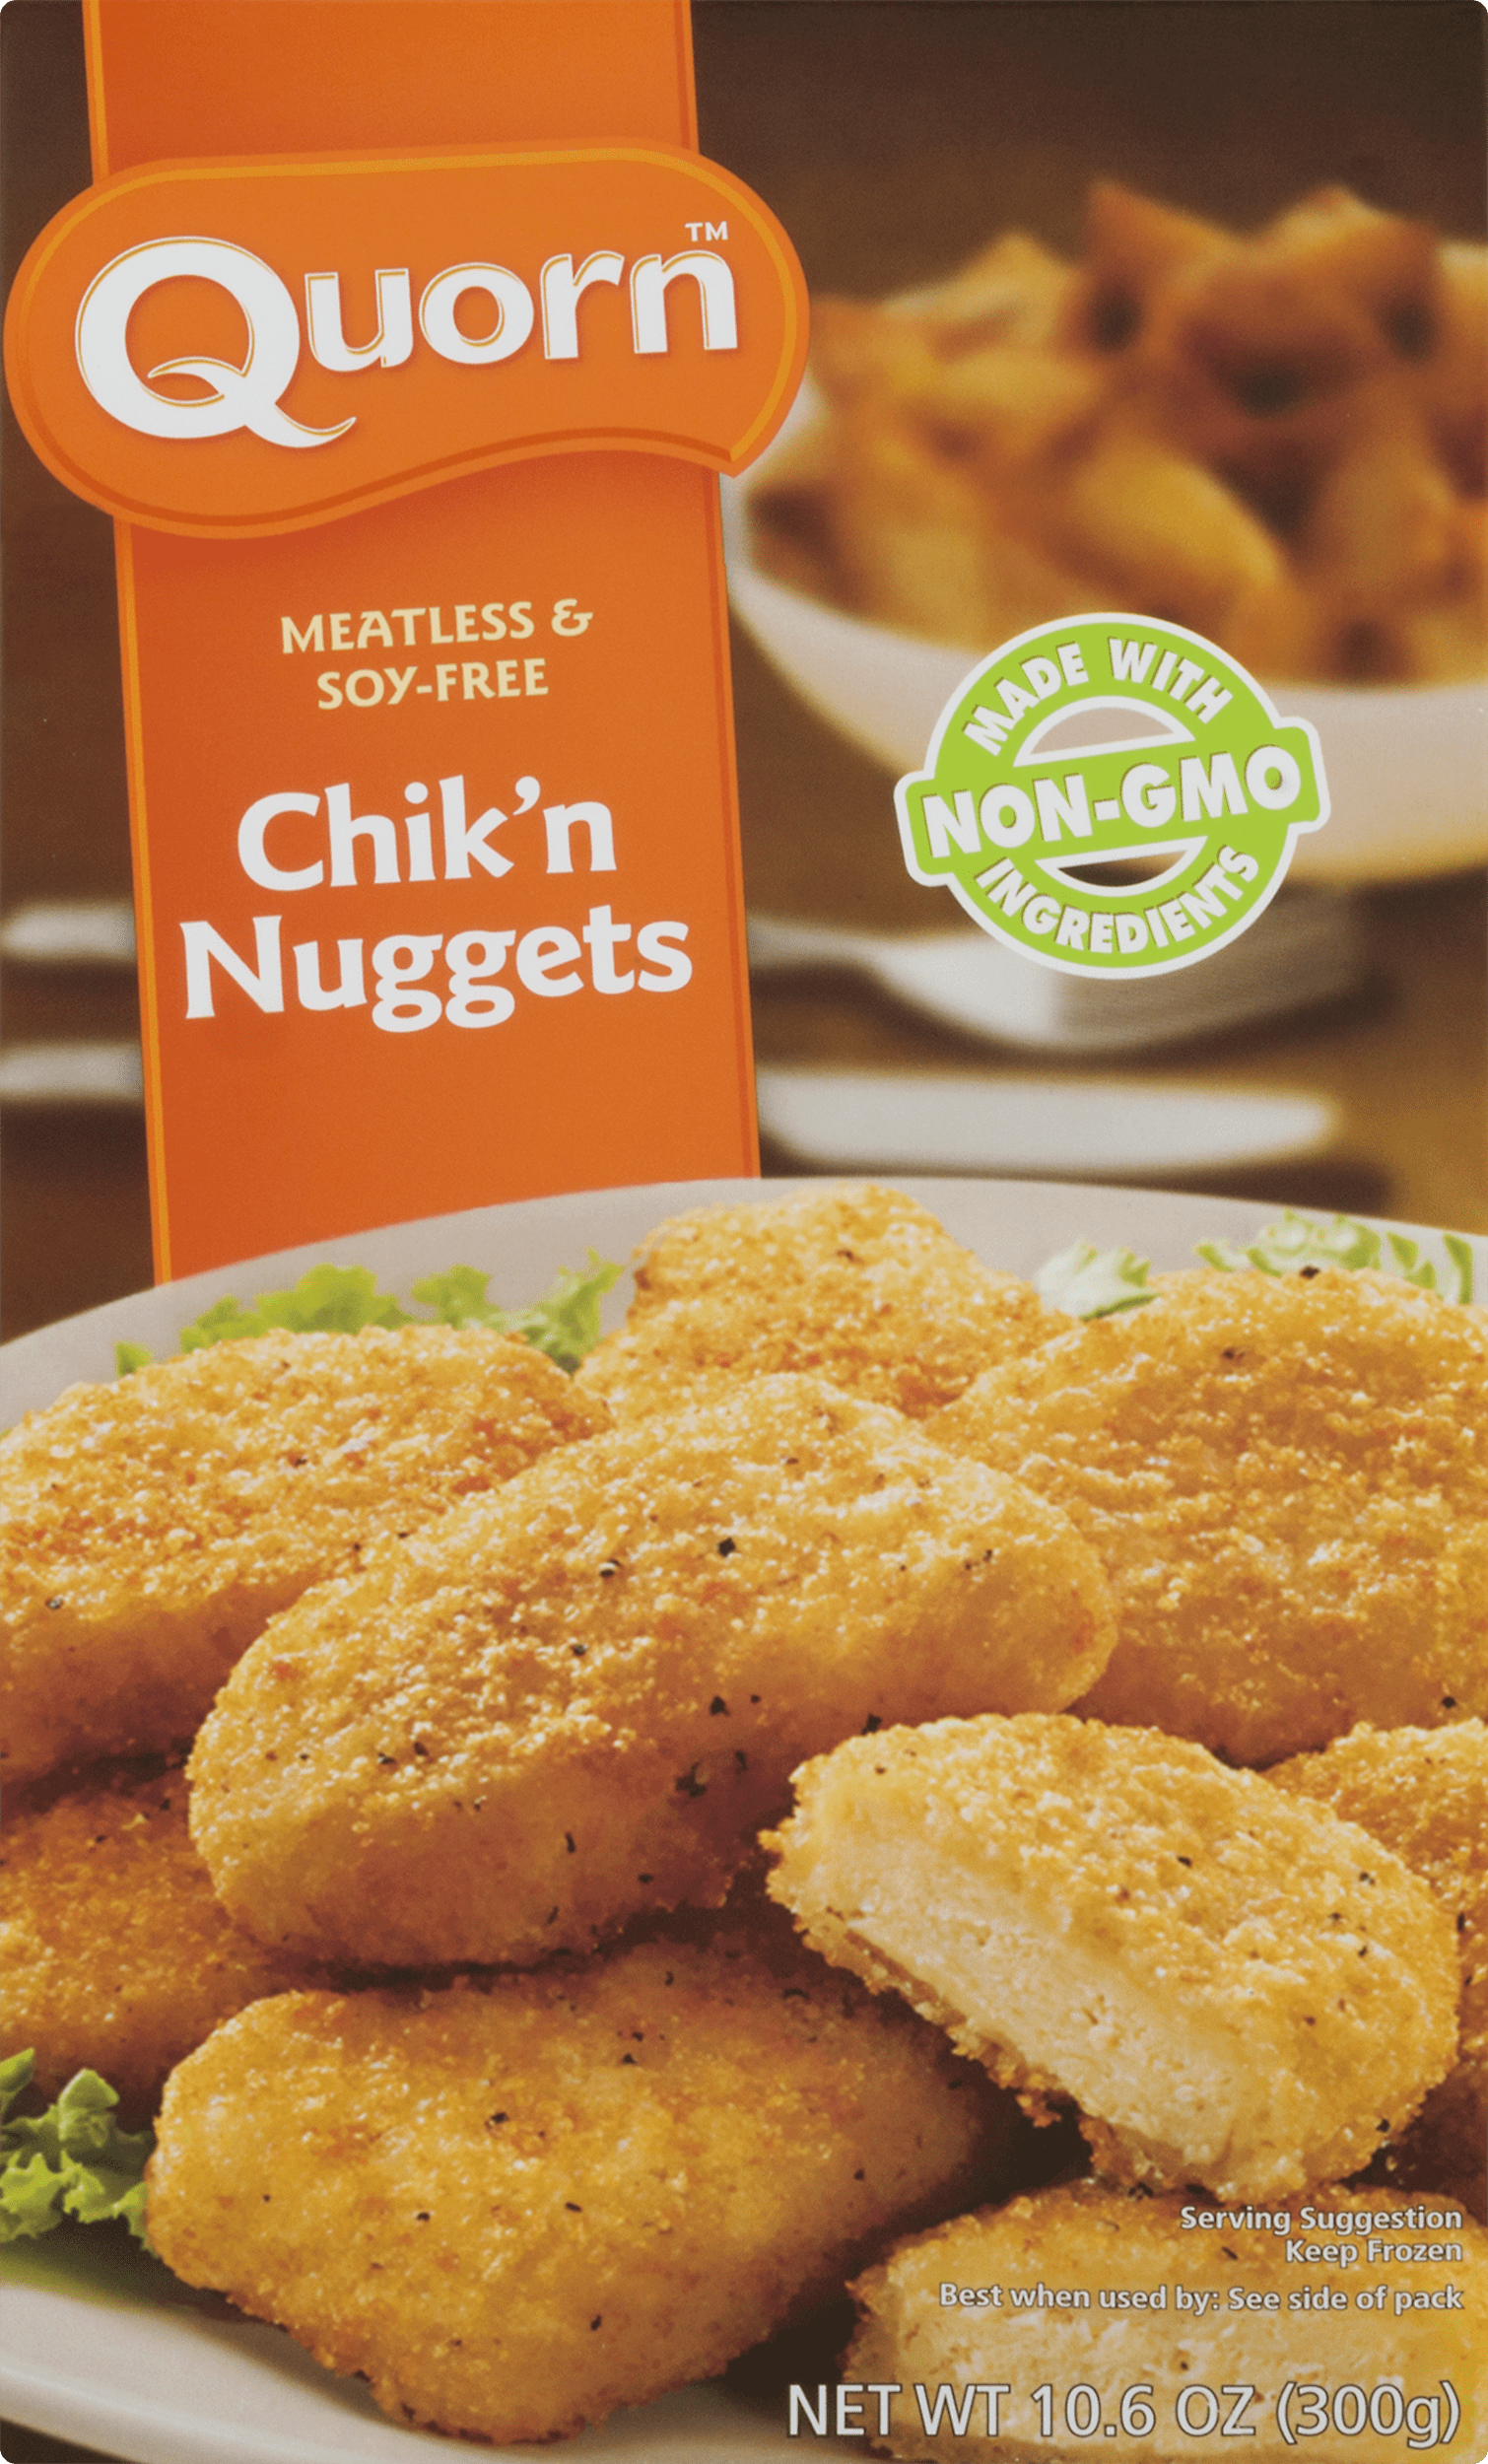 Quorn Meatless Soy Free Chikn Nuggets 106 Oz Walmart in nutrition facts 6 piece chicken mcnuggets intended for Cozy